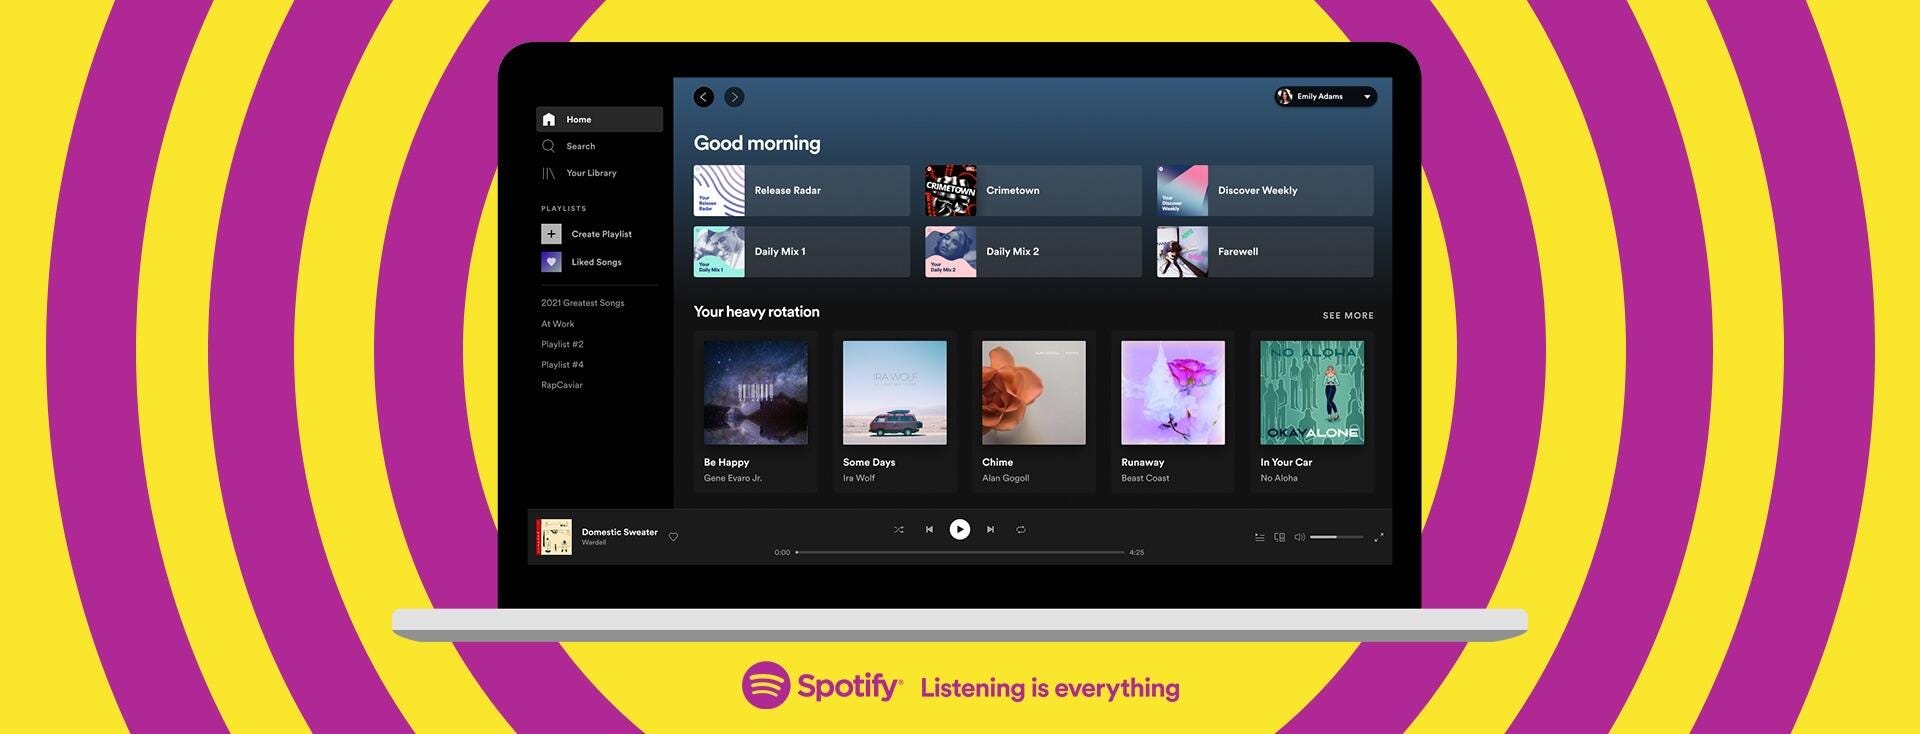 Here’s how to download Spotify playlists and songs on mobile and desktop